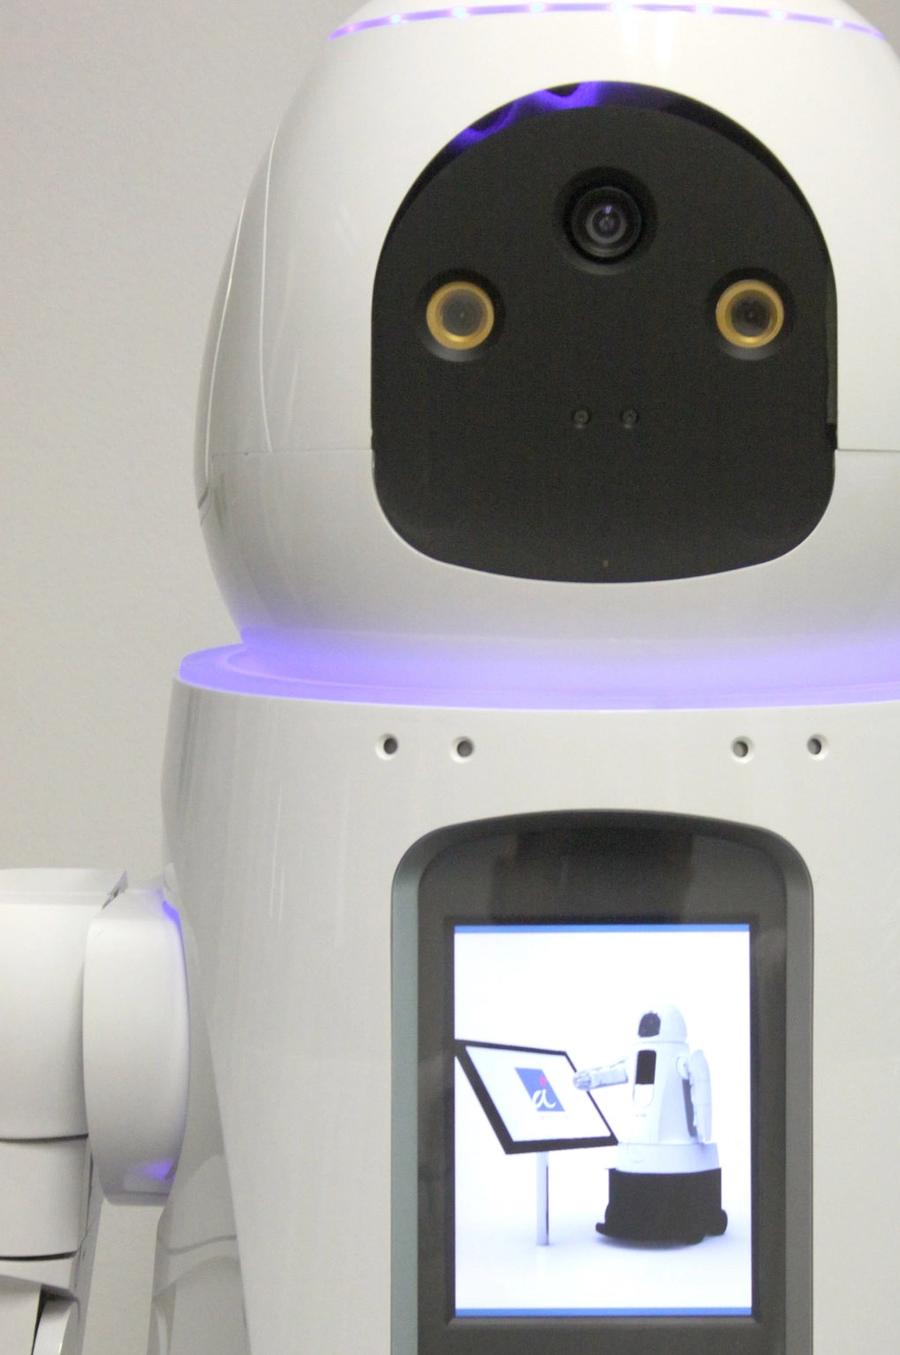 Close up of the robots face shows two eye cameras, and one on its forehead.